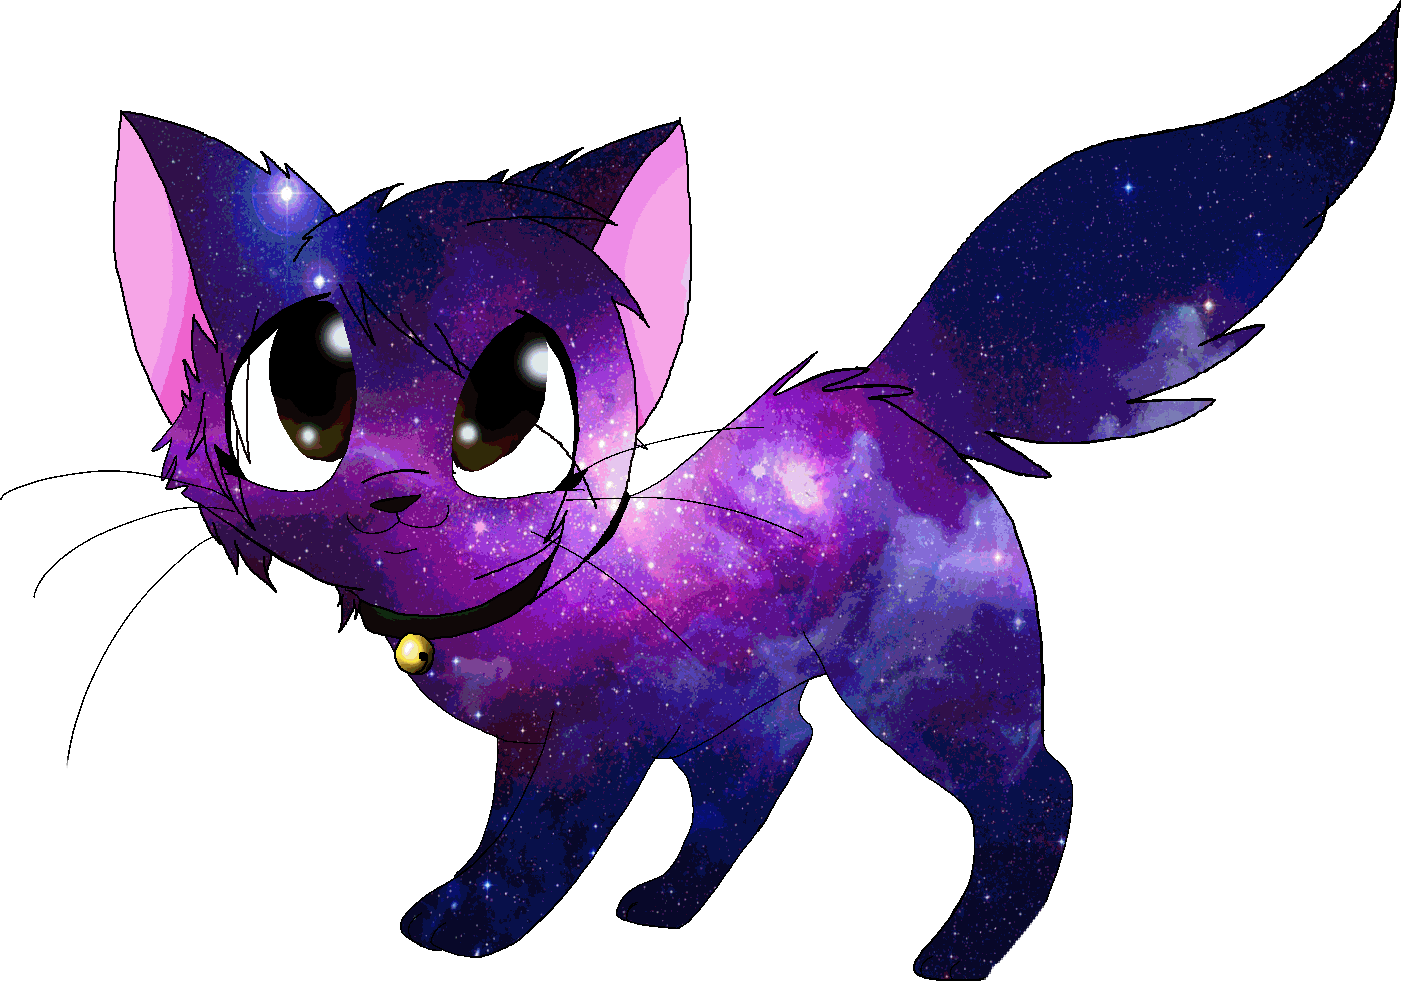 This visual is about cat galaxy freetoedit #cat#galaxy.